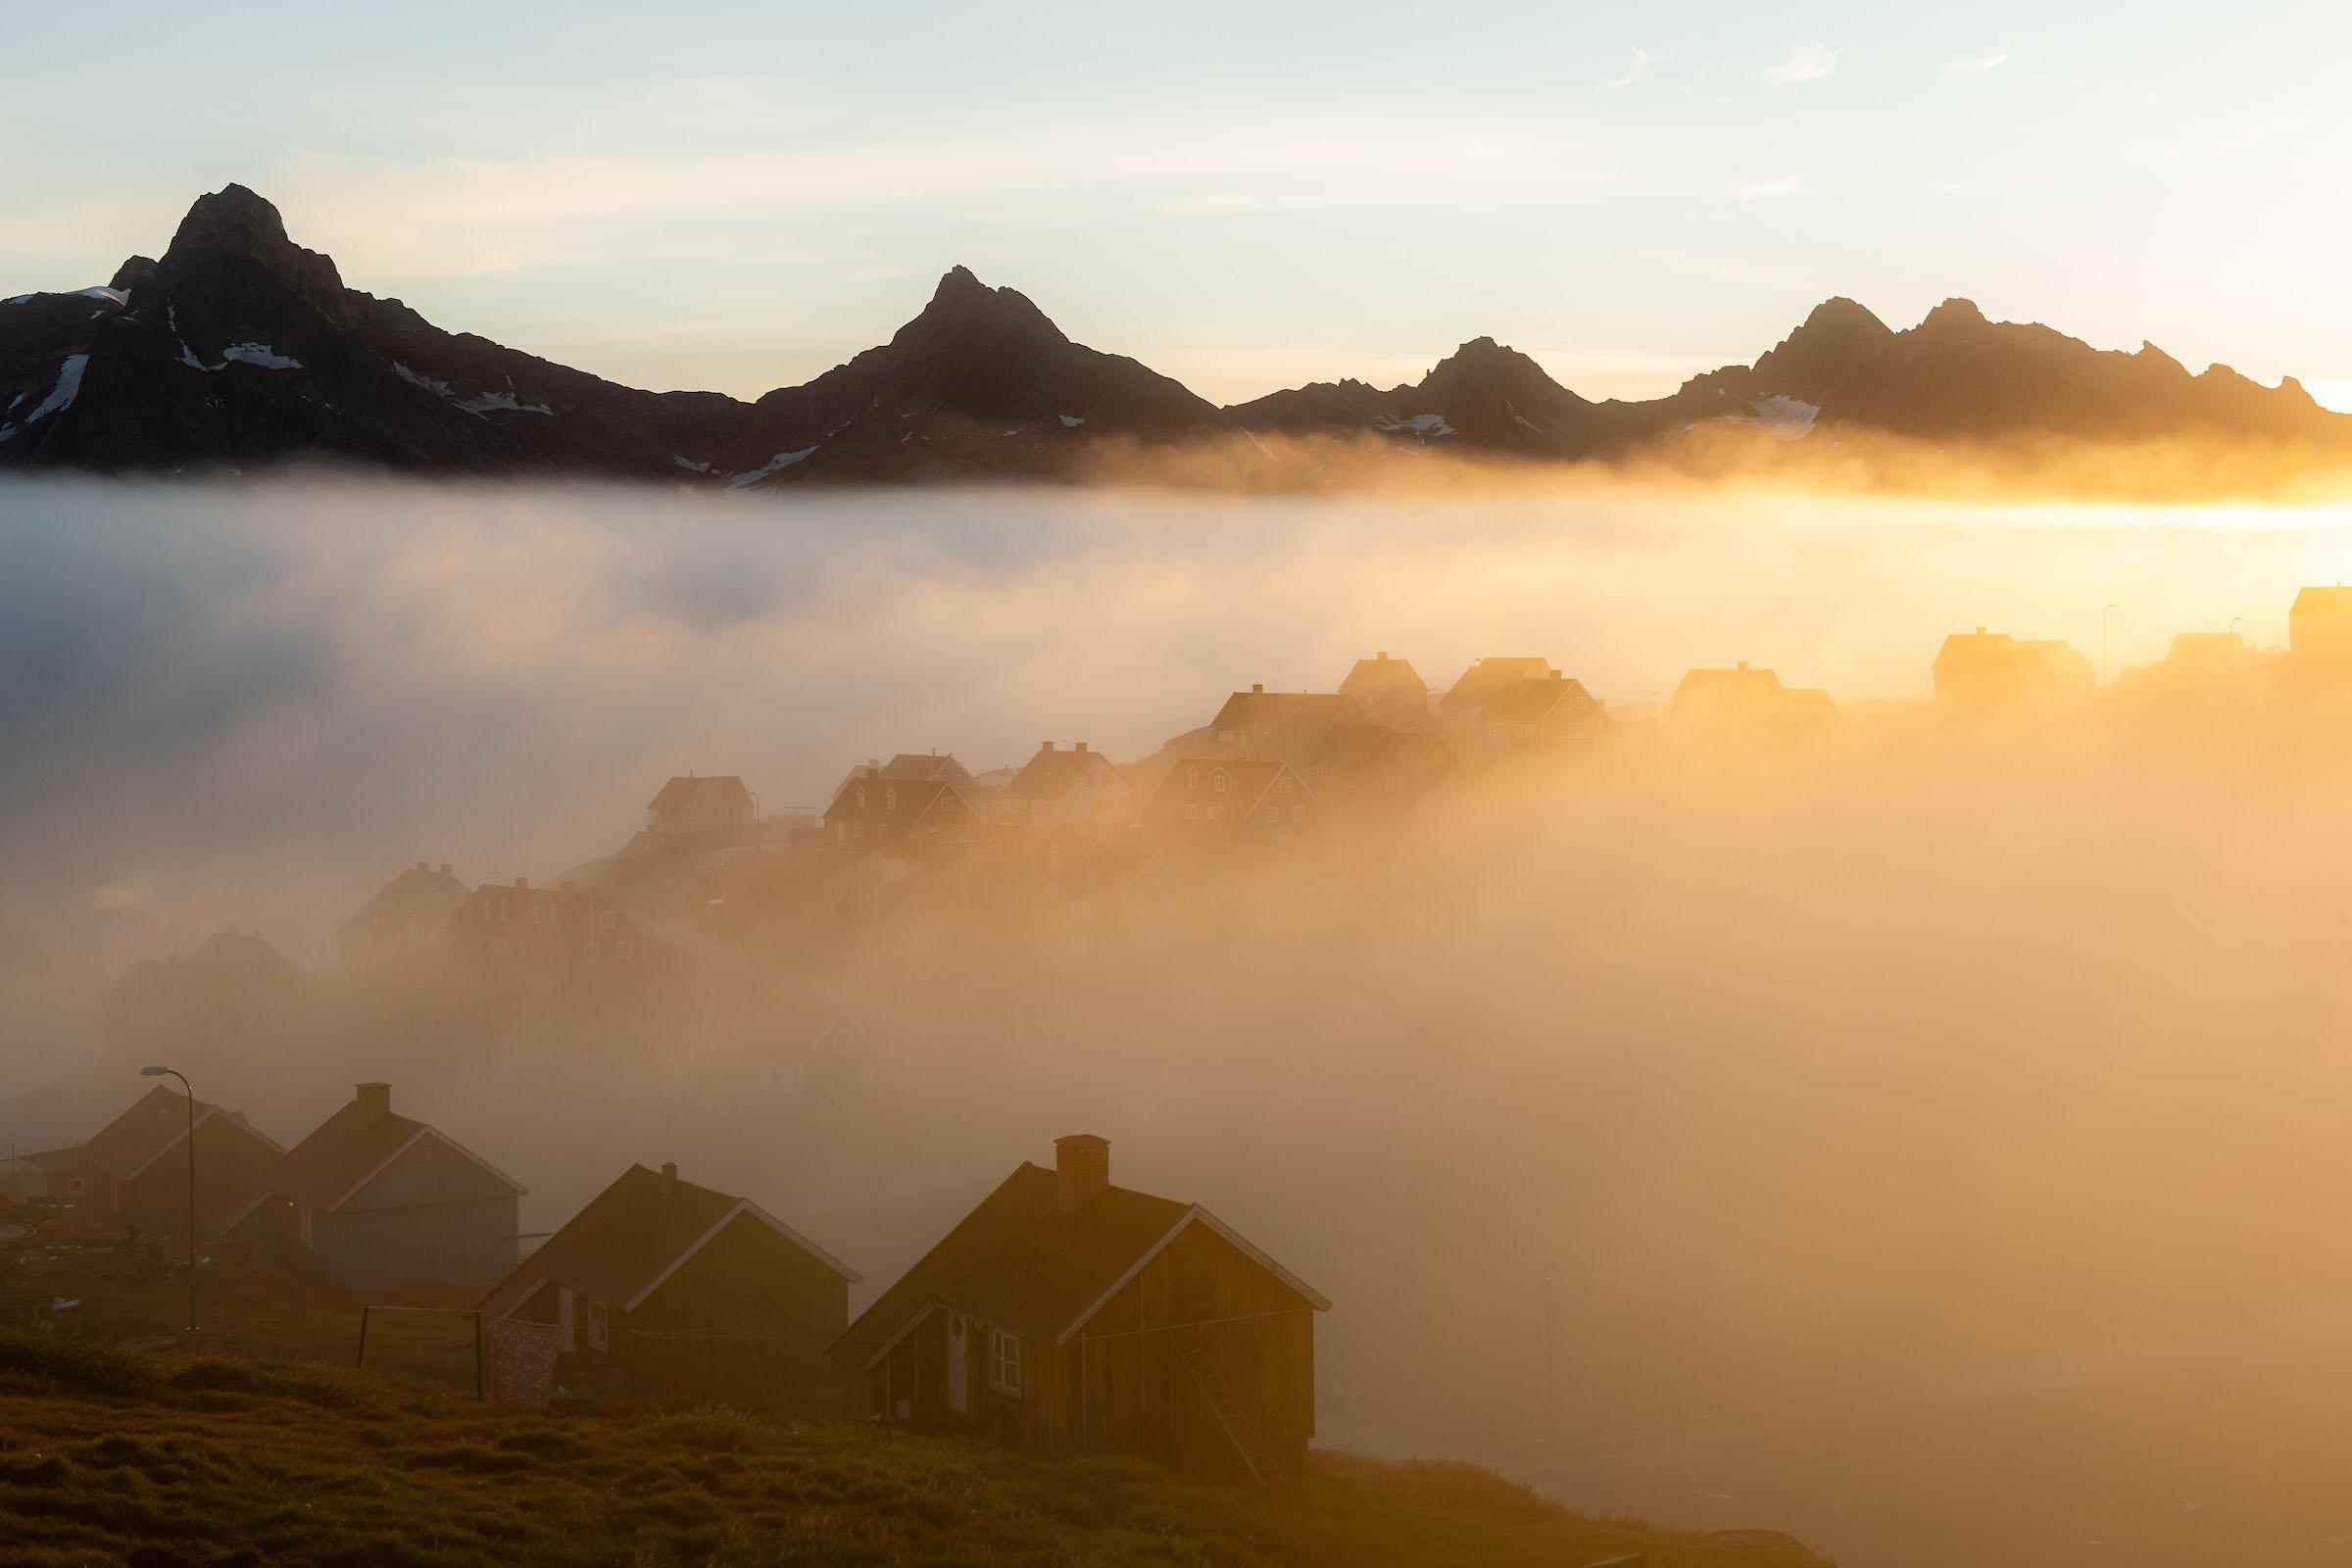 A morning from the books in Tasiilaq. Photo by Philipp Mitterlehner - Visit Greenland